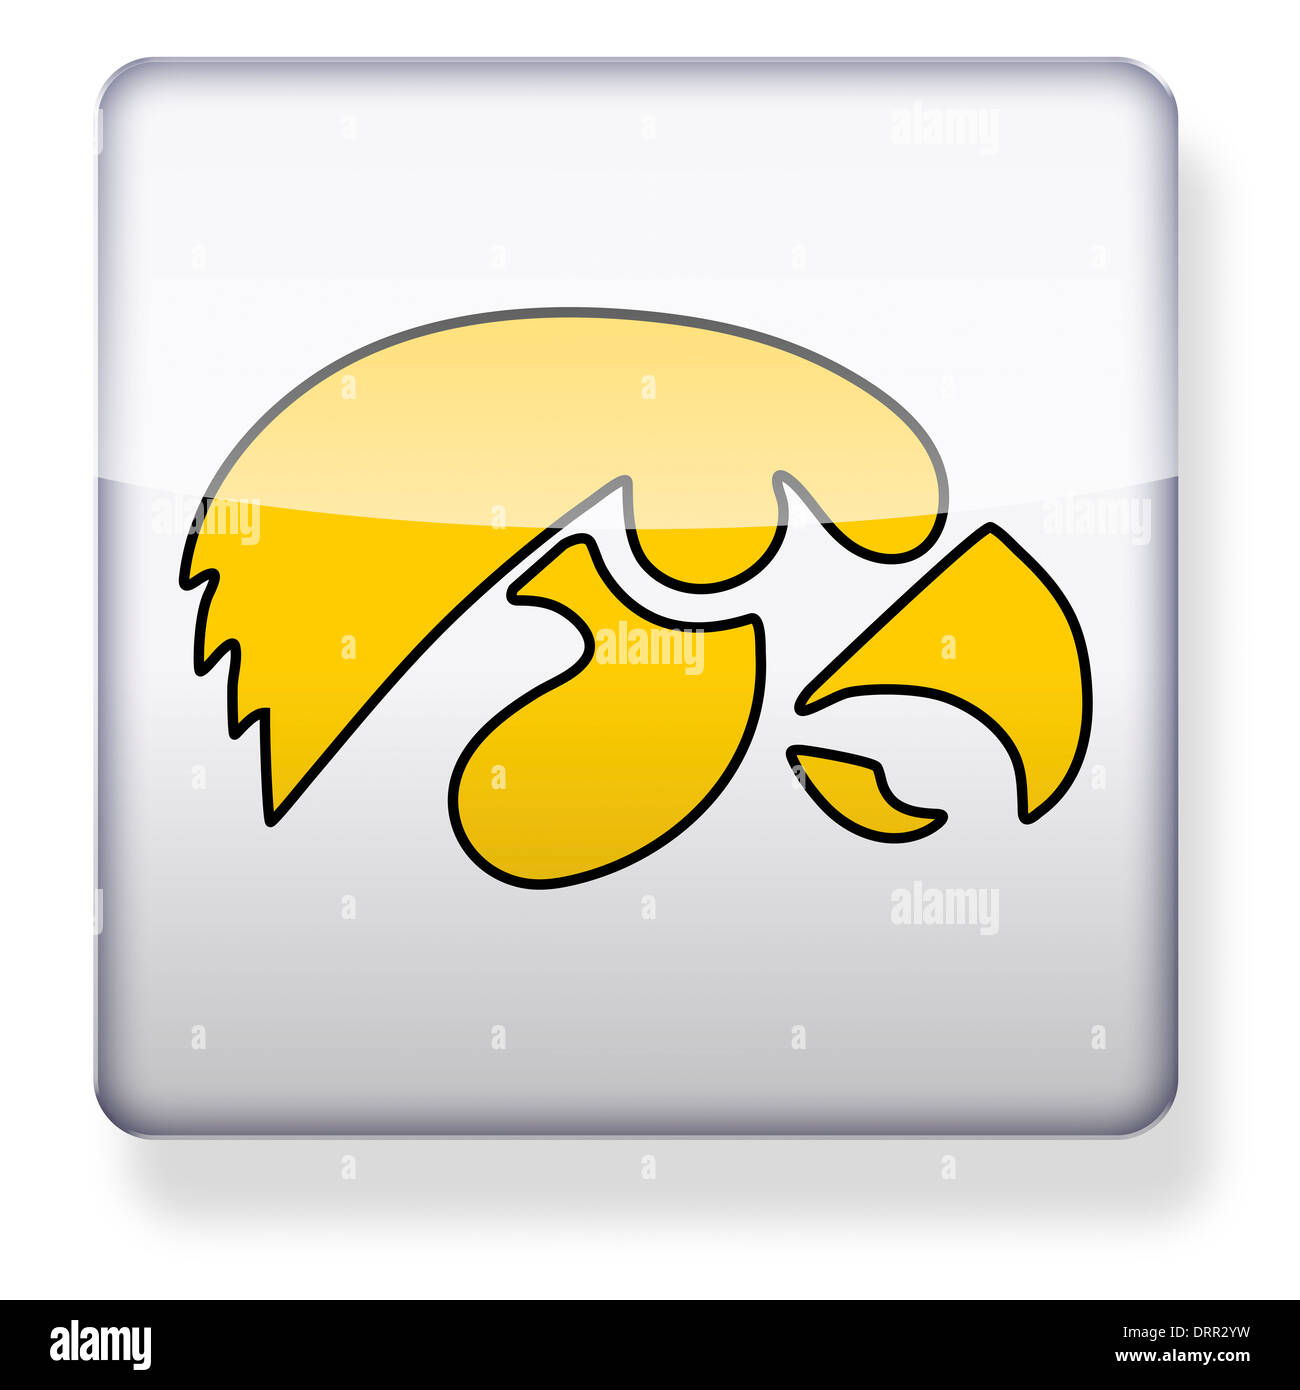 Iowa Hawkeyes US college football logo as an app icon. Clipping path included. Stock Photo